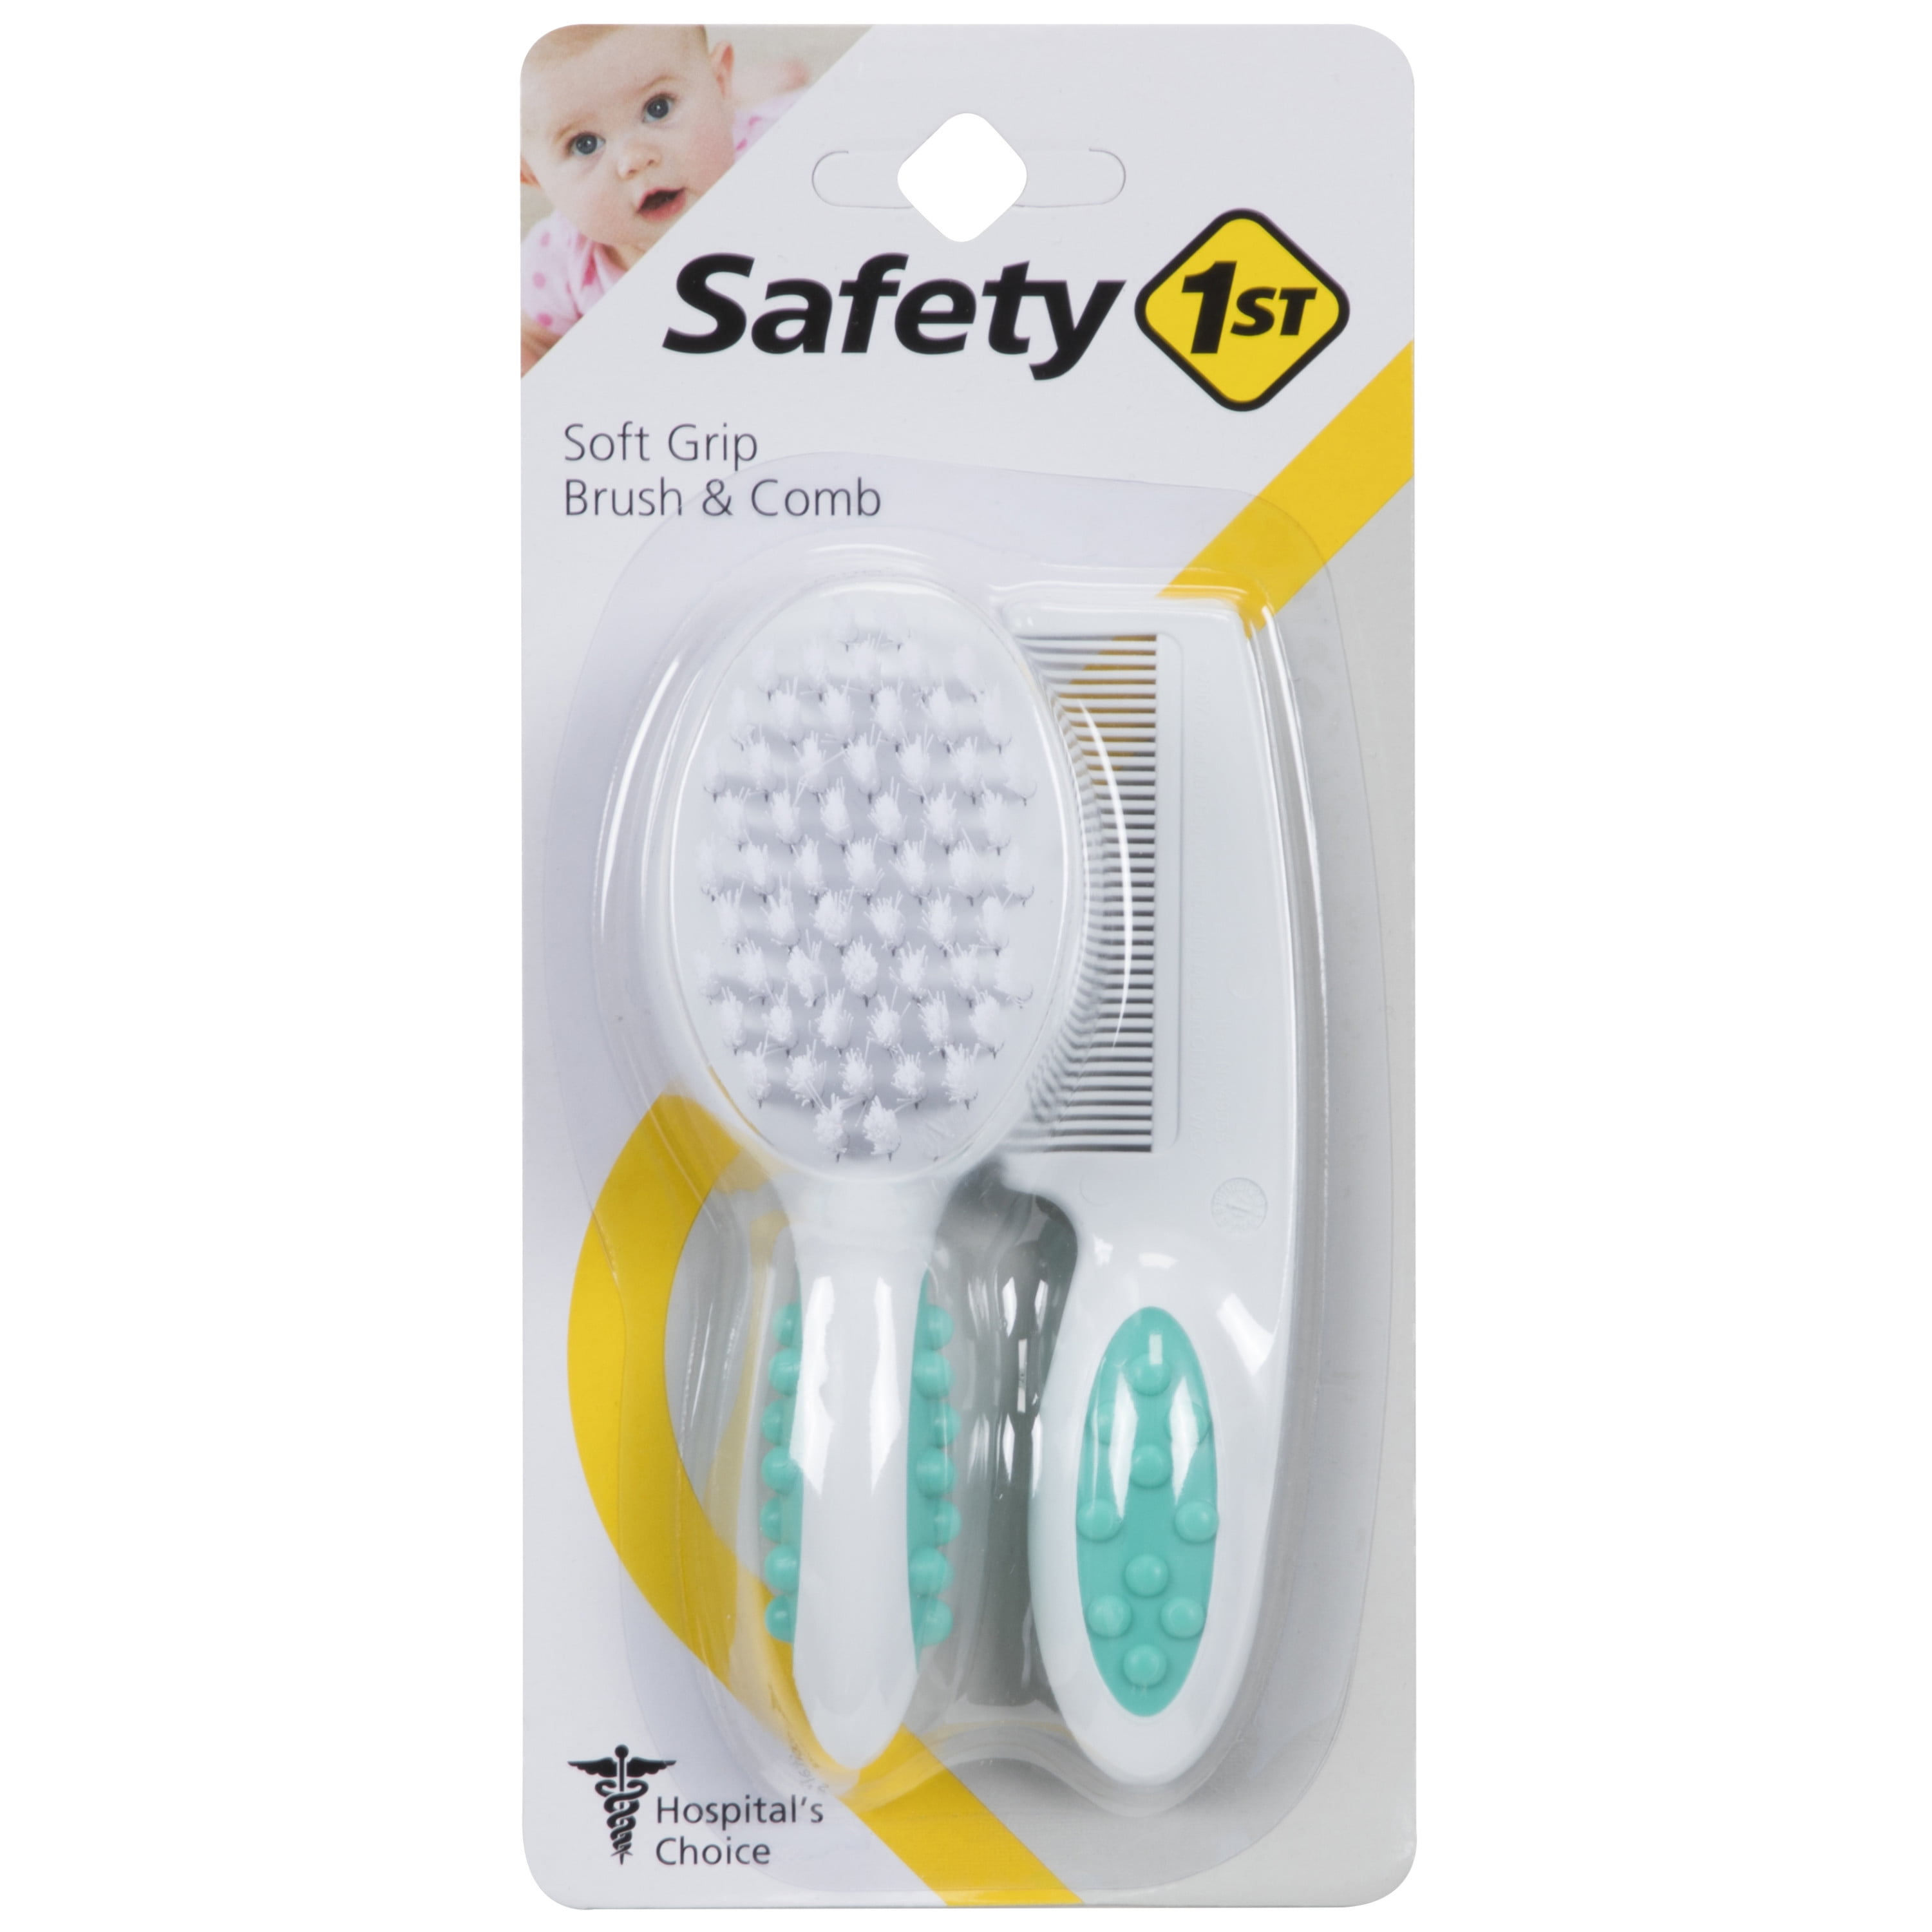 Safety 1 Soft Grip Brush & Comb, Artic Blue